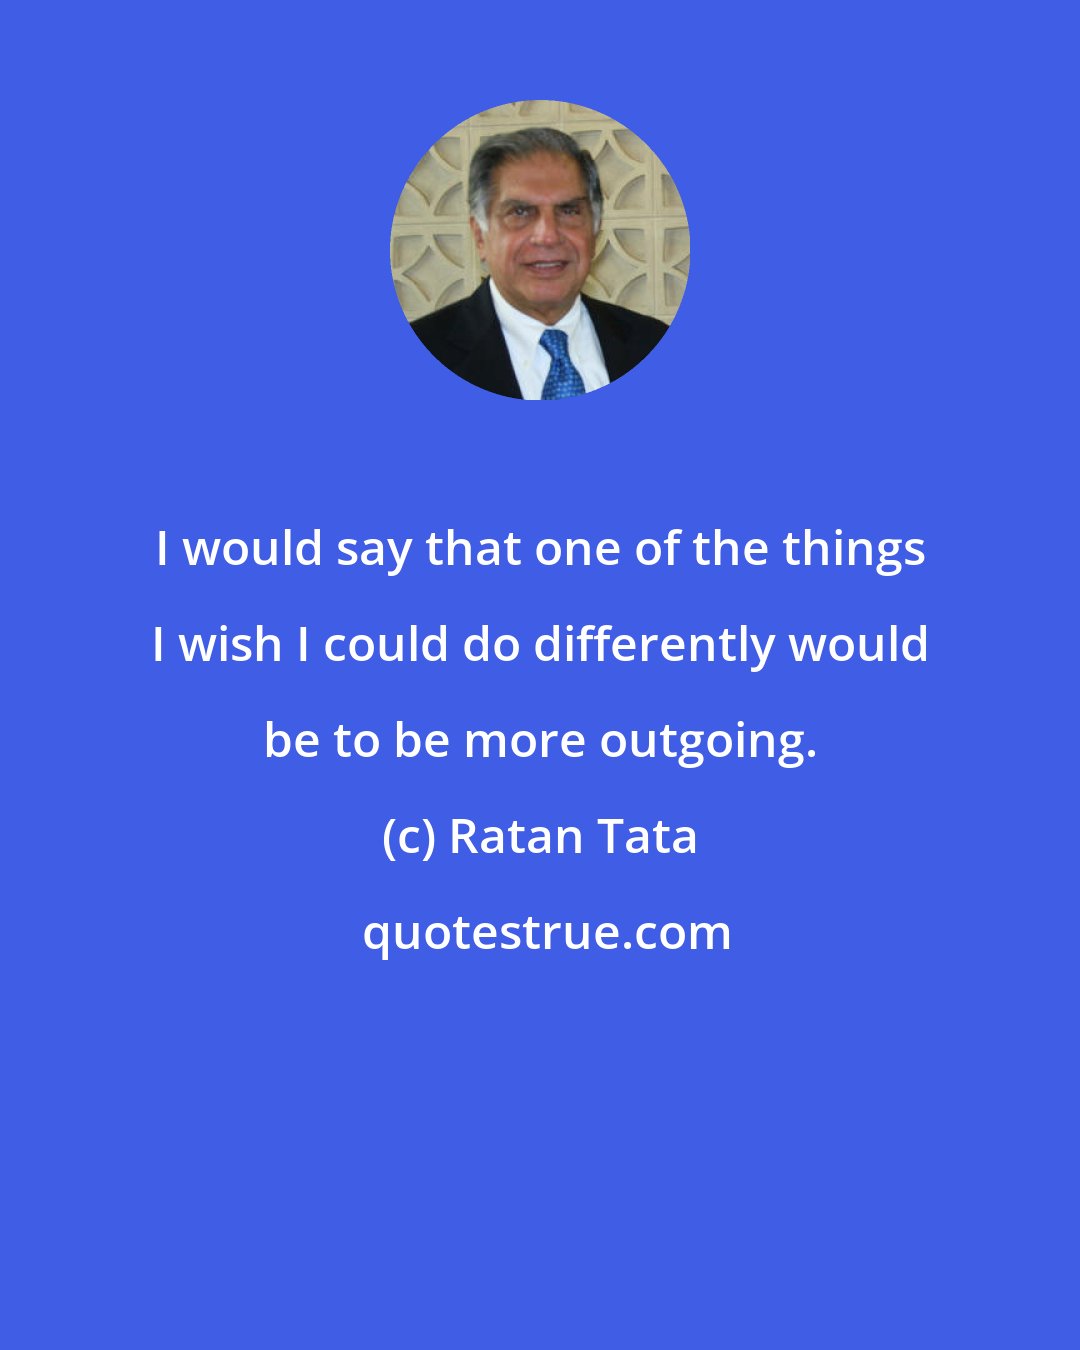 Ratan Tata: I would say that one of the things I wish I could do differently would be to be more outgoing.